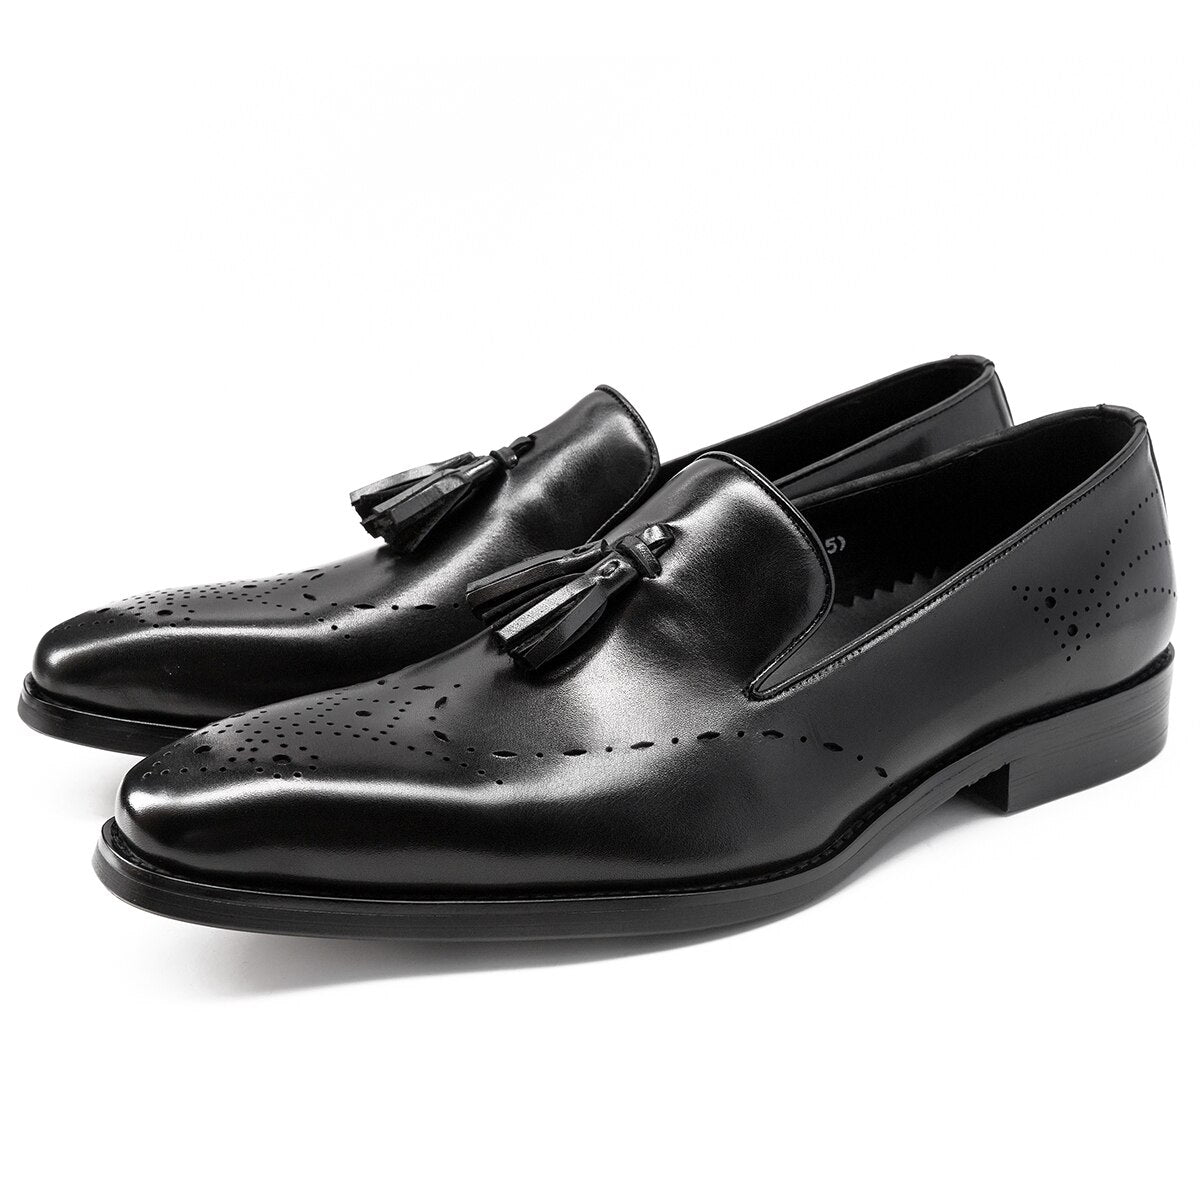 Men Loafers Tassel Shoes High Quality Slip-On luxury Formal Man Genuine Leather Shoes